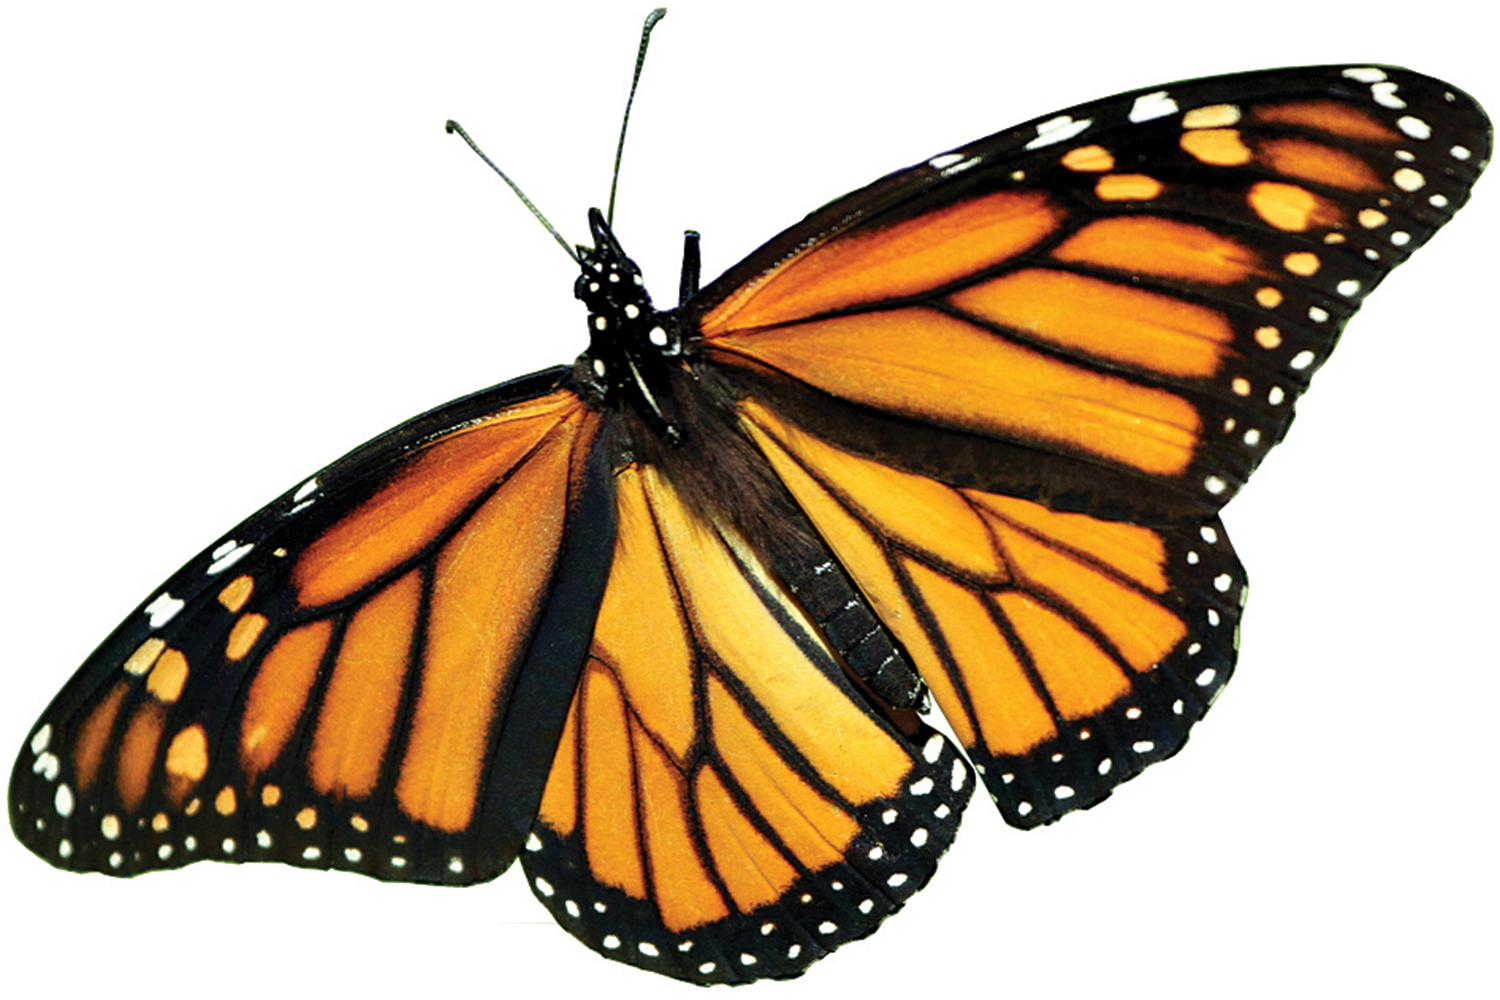 The farm bill and the precipitous decline of monarch butterflies ...